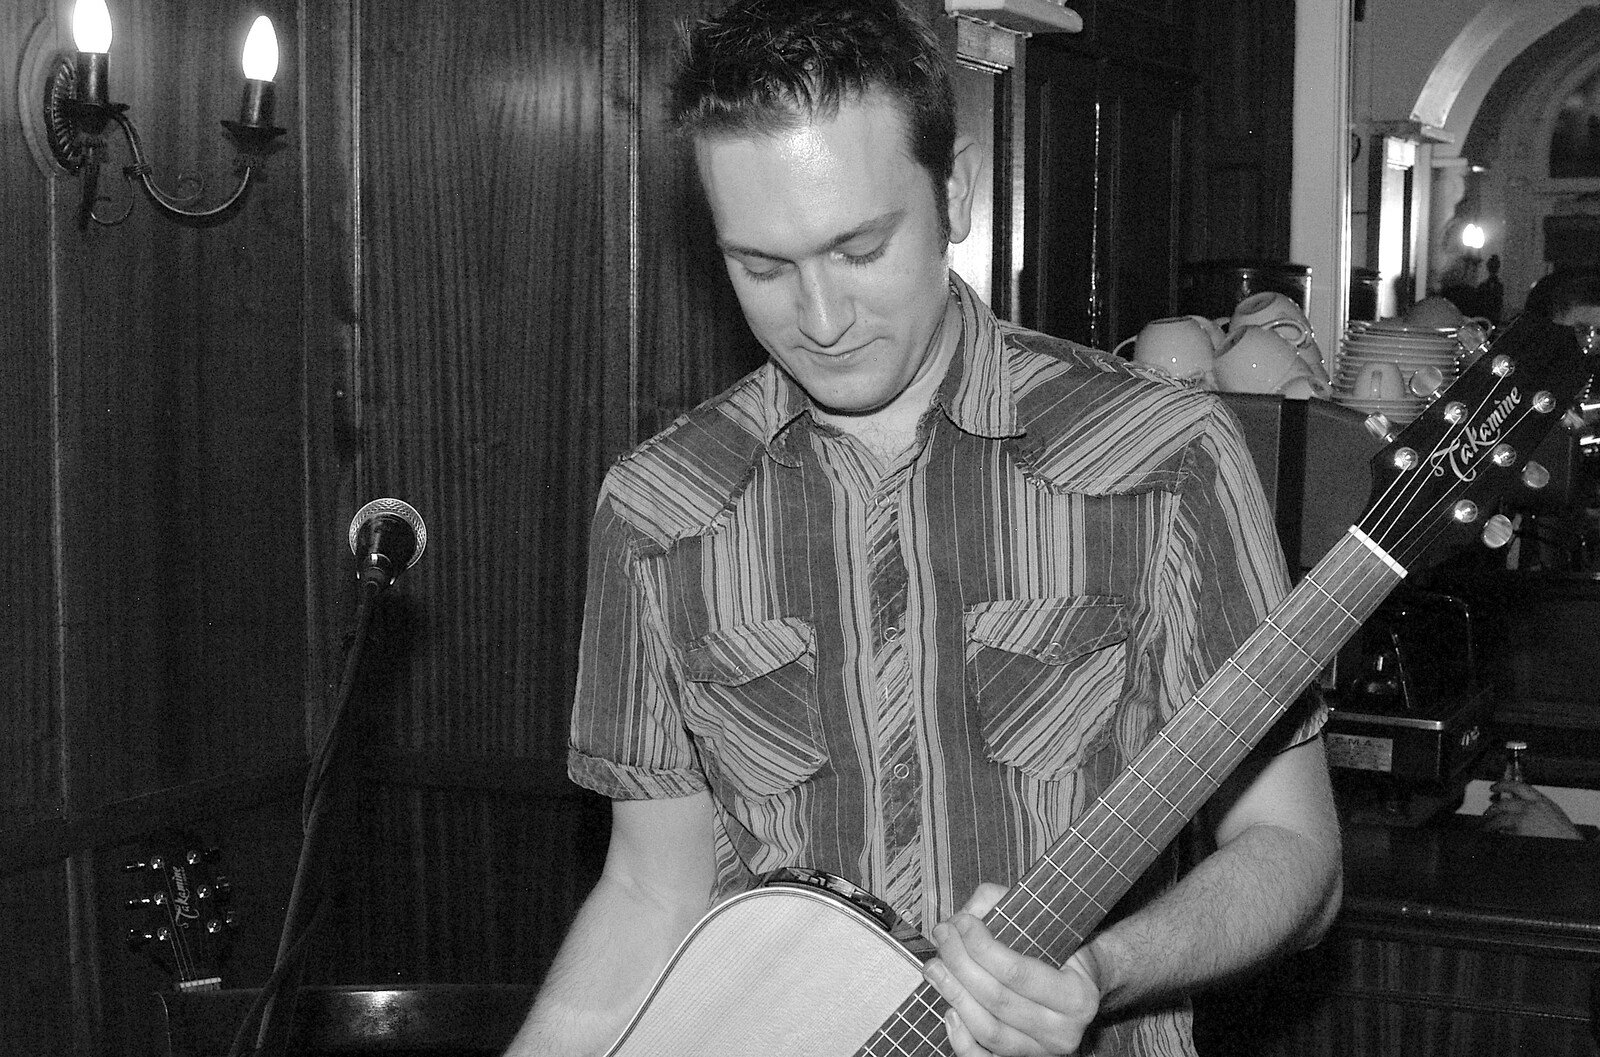 Warren Sadiwskyj puts his guitar away from Most Haunted, and Music at Bar 13 and the Cherry Tree, Mellis - 26th November 2005